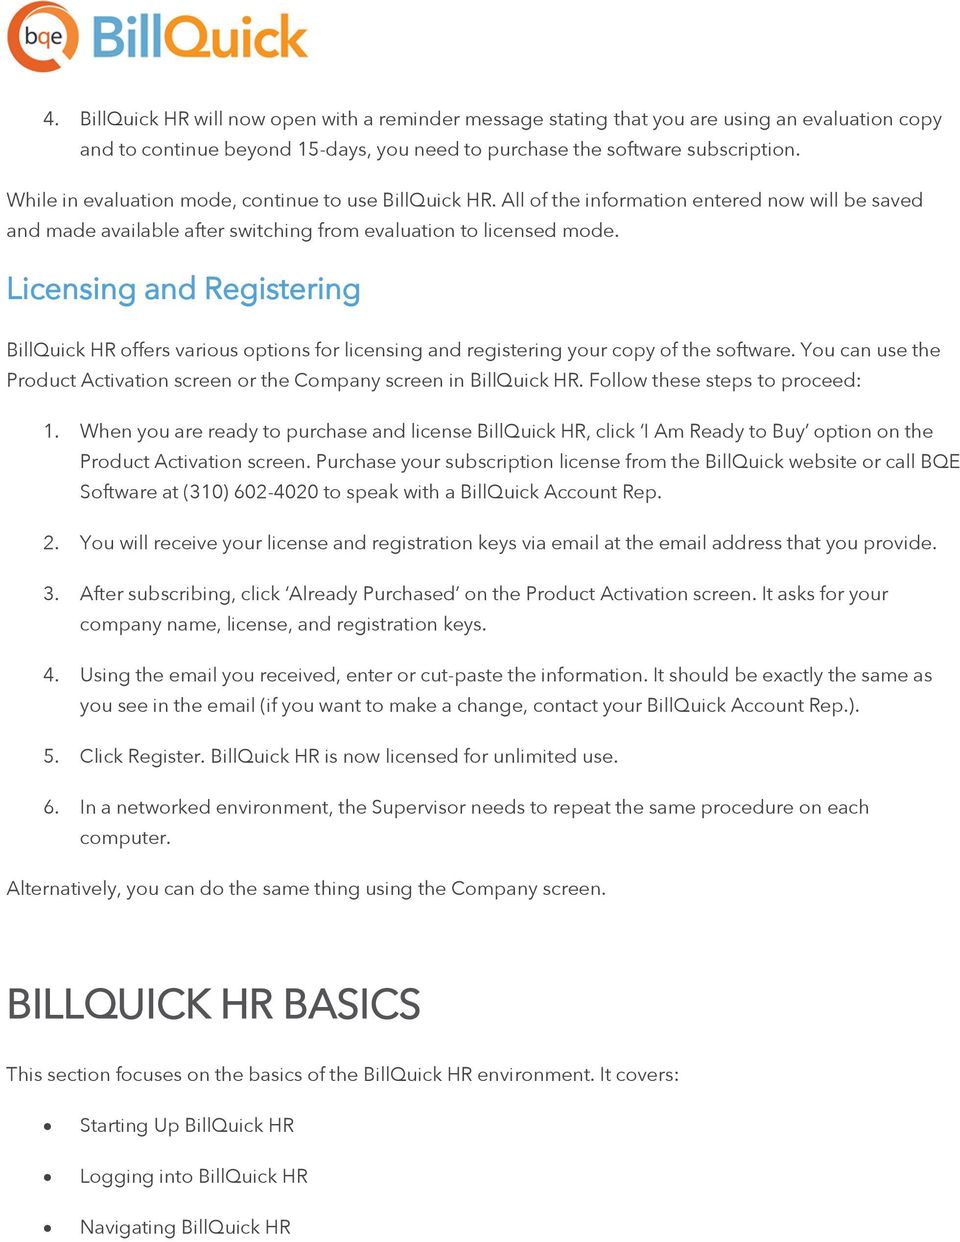 Licensing and Registering BillQuick HR offers various options for licensing and registering your copy of the software. You can use the Product Activation screen or the Company screen in BillQuick HR.